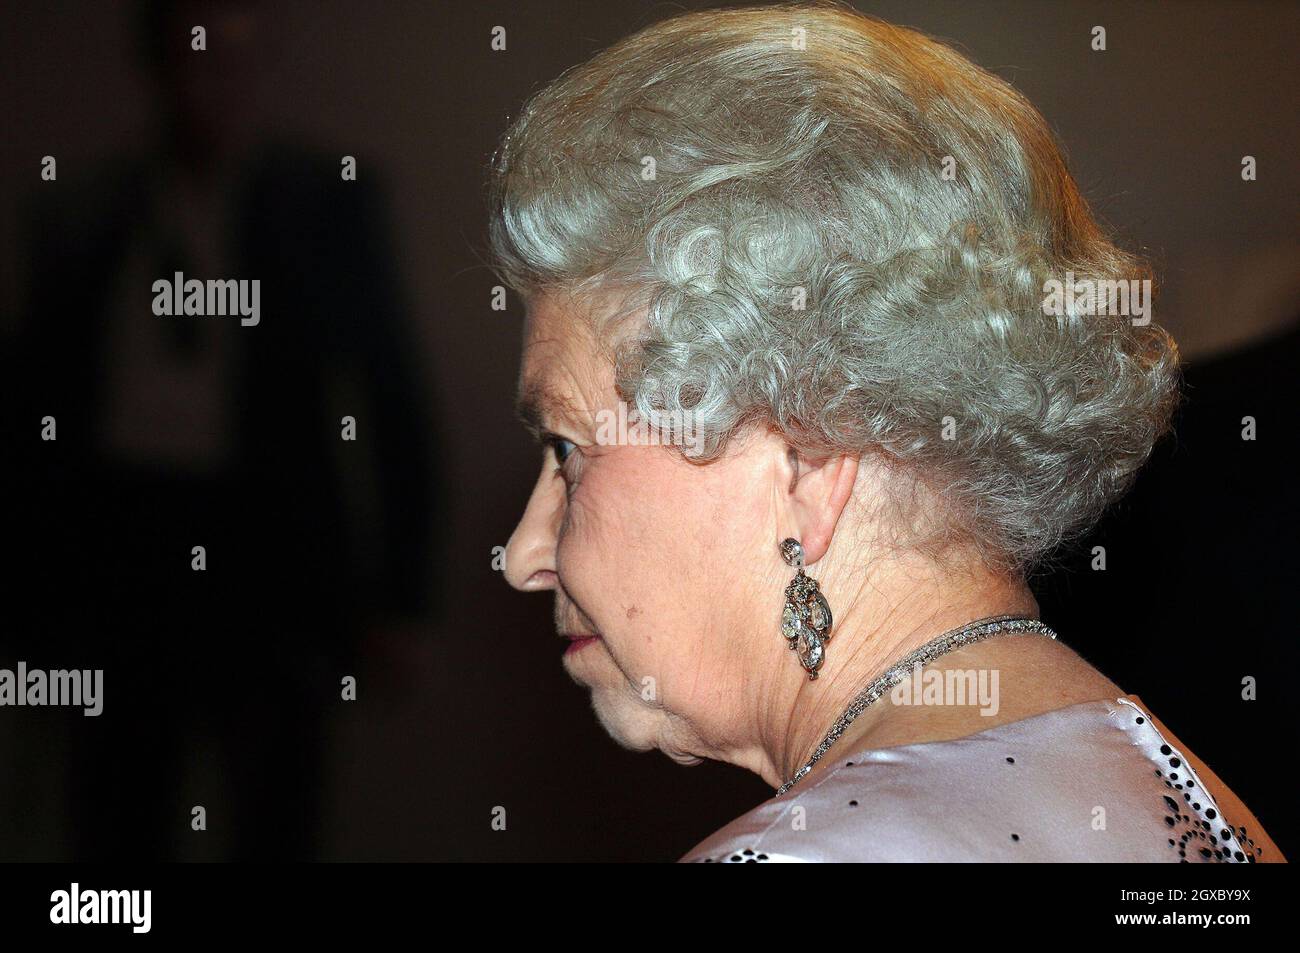 Queen Elizabeth ll attends the Royal Premiere for the 21st Bond film 'Casino Royale' at the Odeon in Leicester Square, London on November 14, 2006. Anwar Hussein/EMPICS Entertainment  Stock Photo